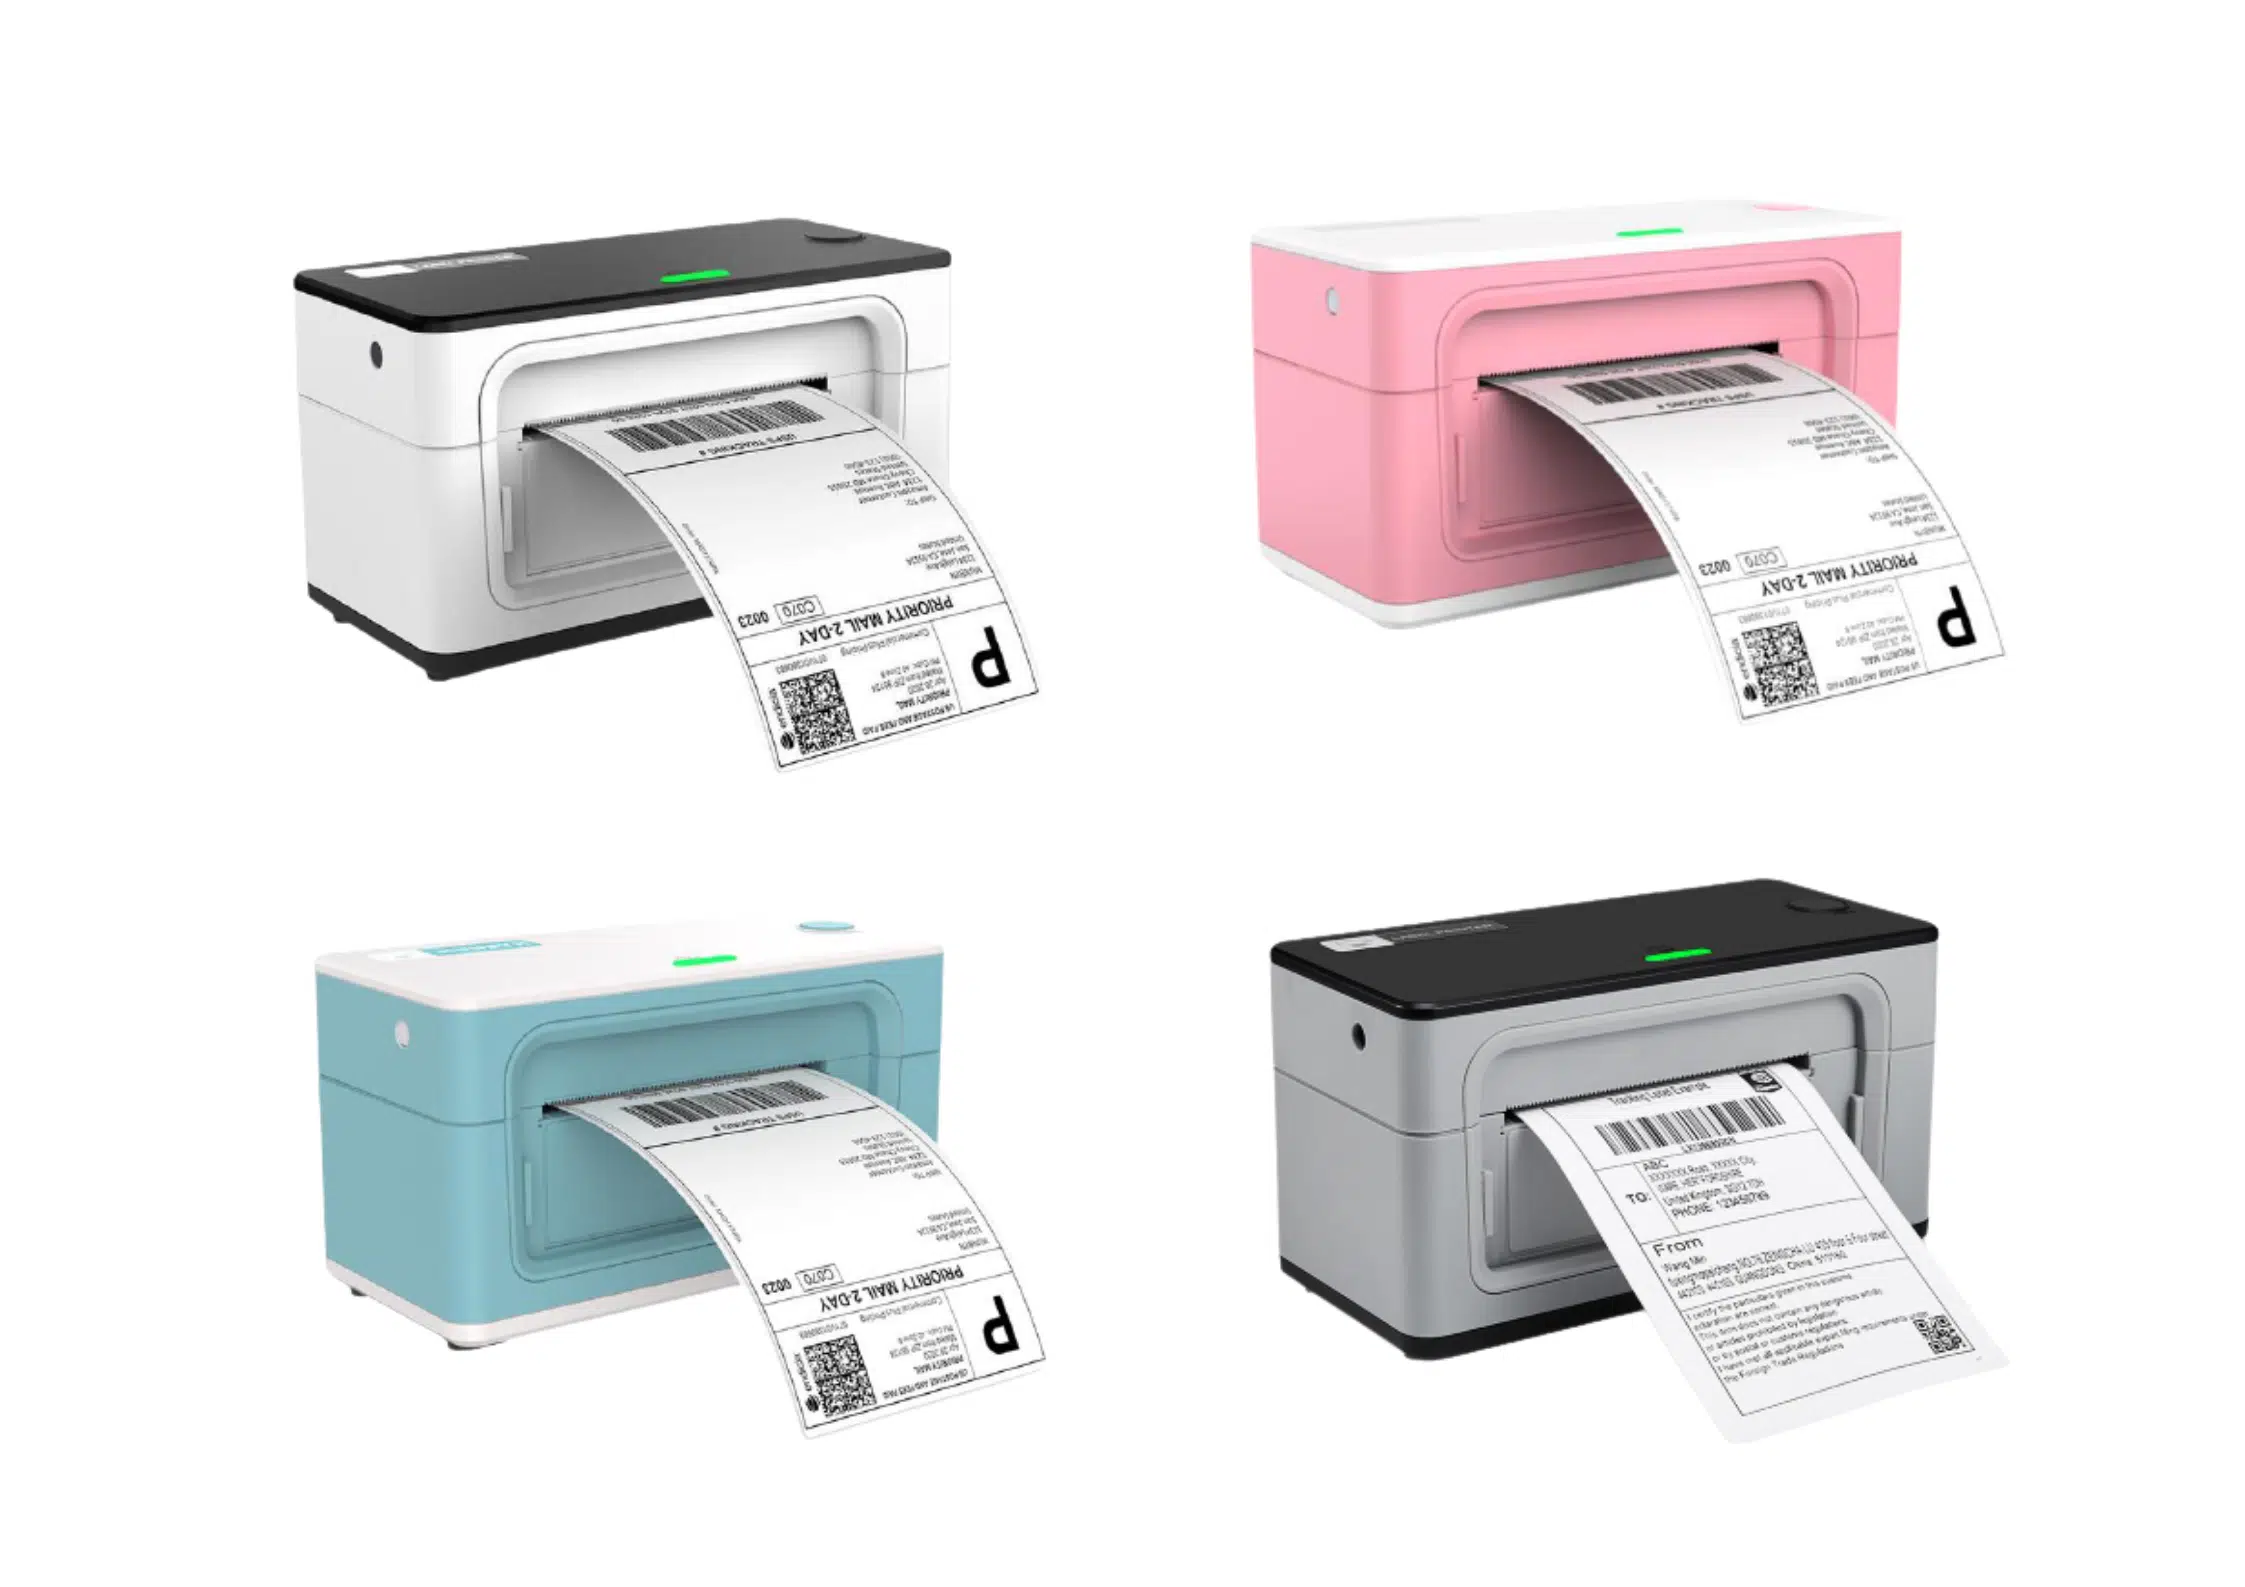 MUNBYN Thermal Shipping Label Printer Review